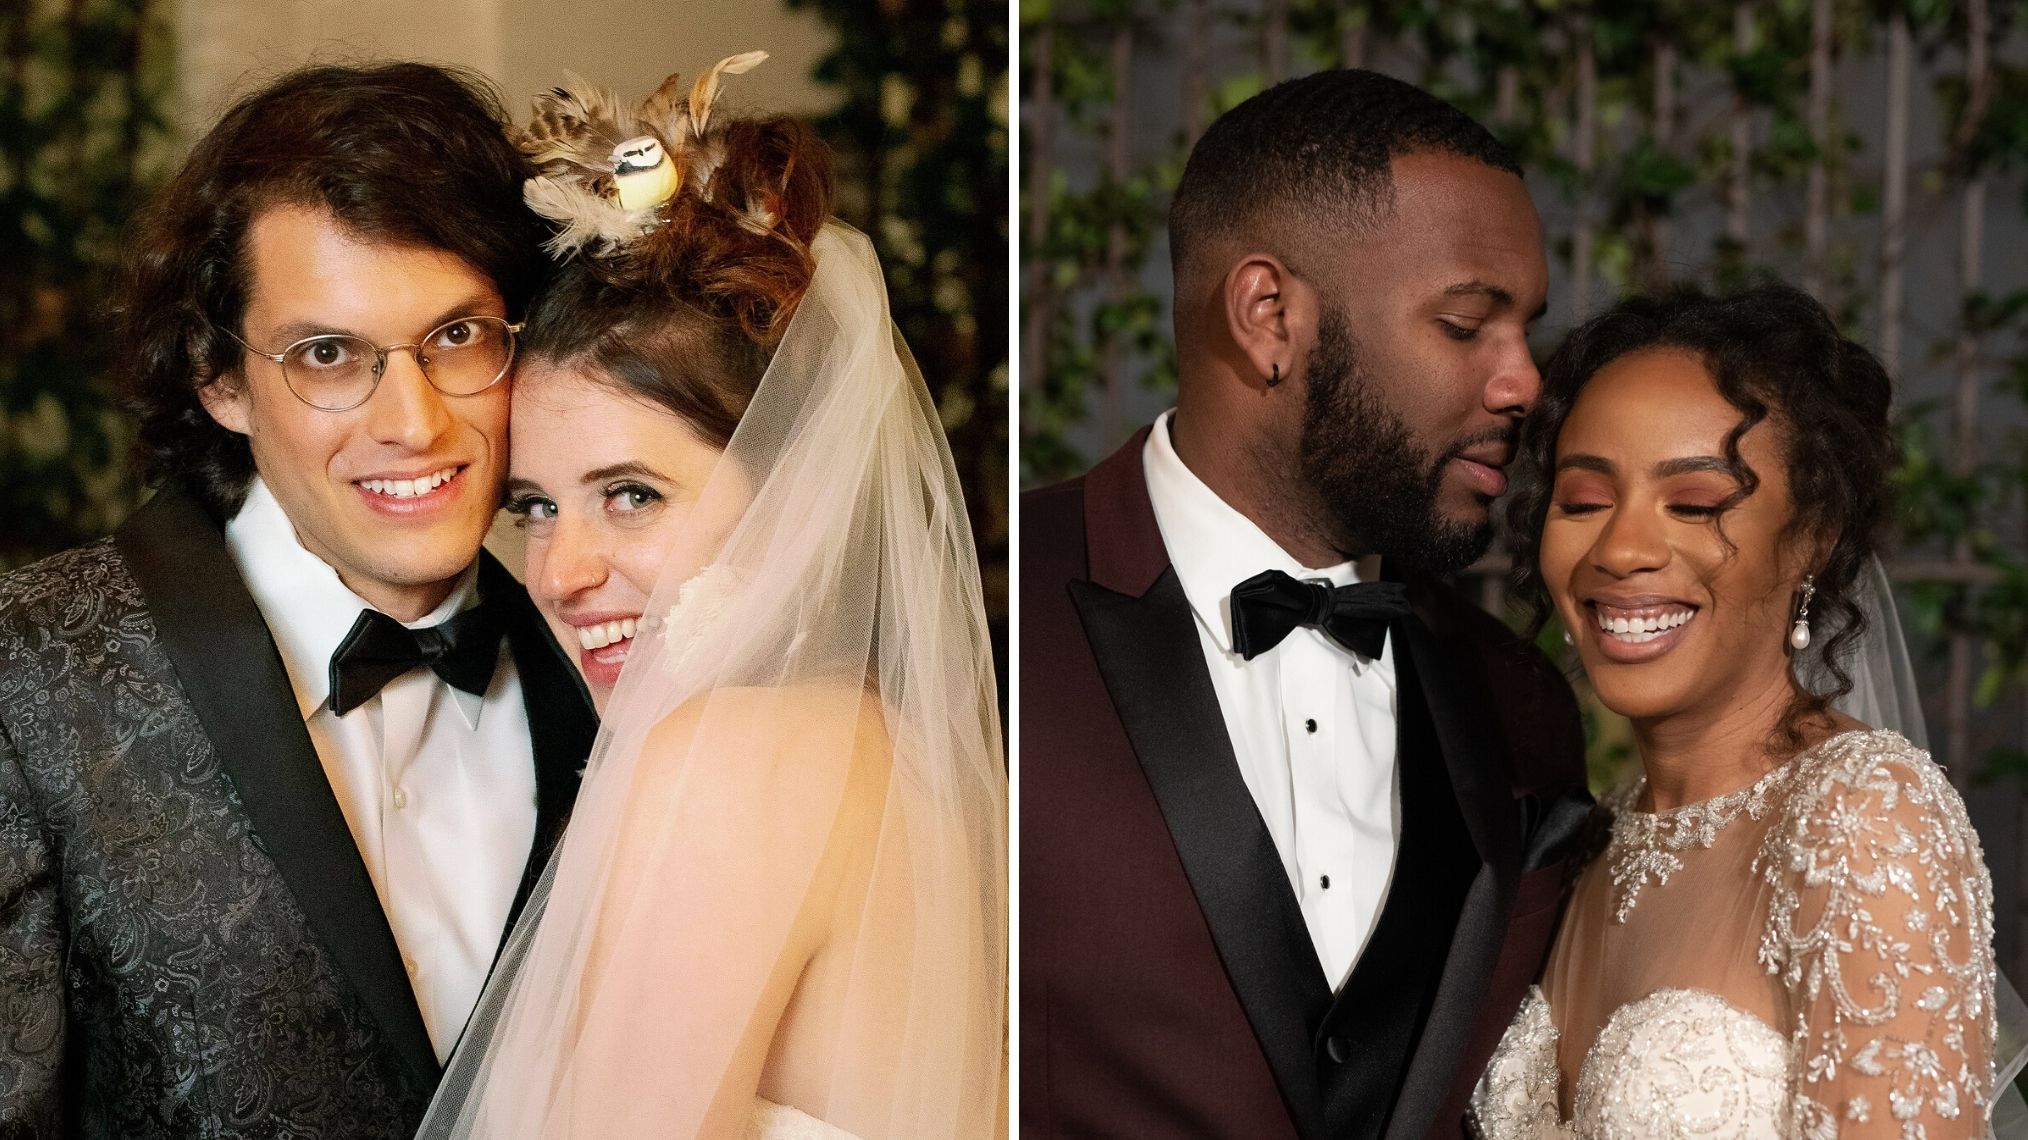 Get to Know the 'Married at First Sight' Season 11 Cast (PHOTOS)